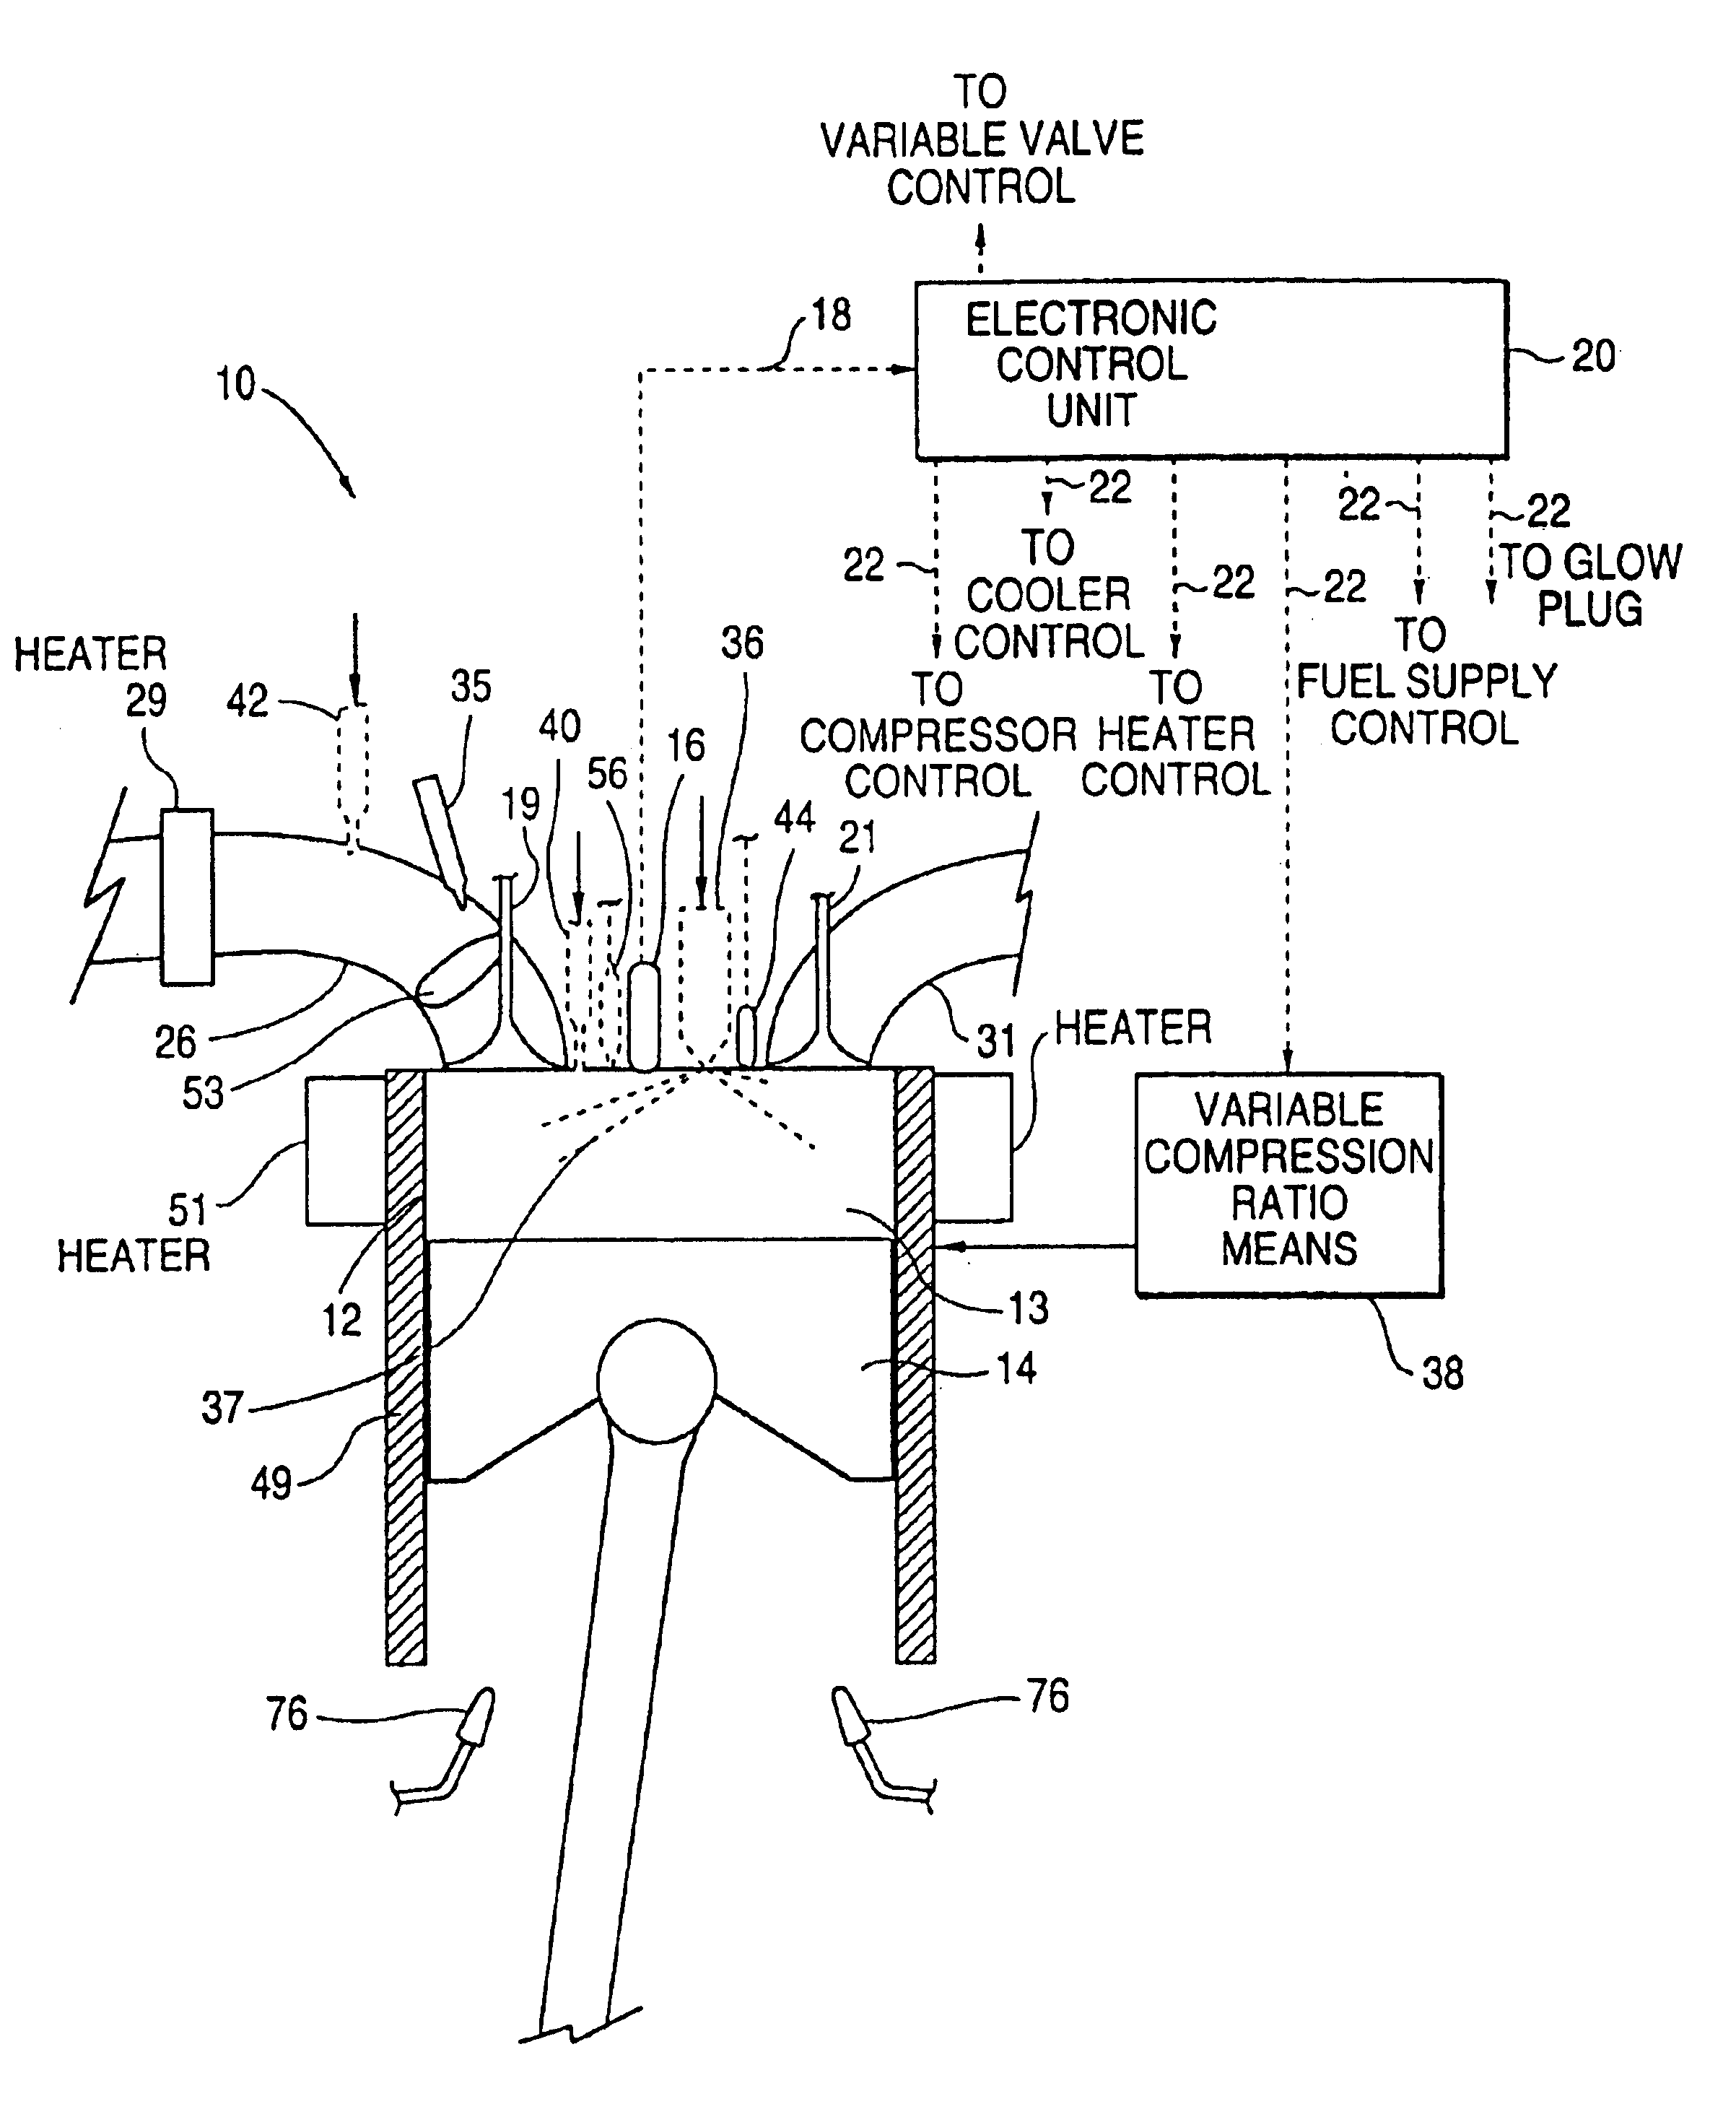 Premixed charge compression ignition engine with optimal combustion control